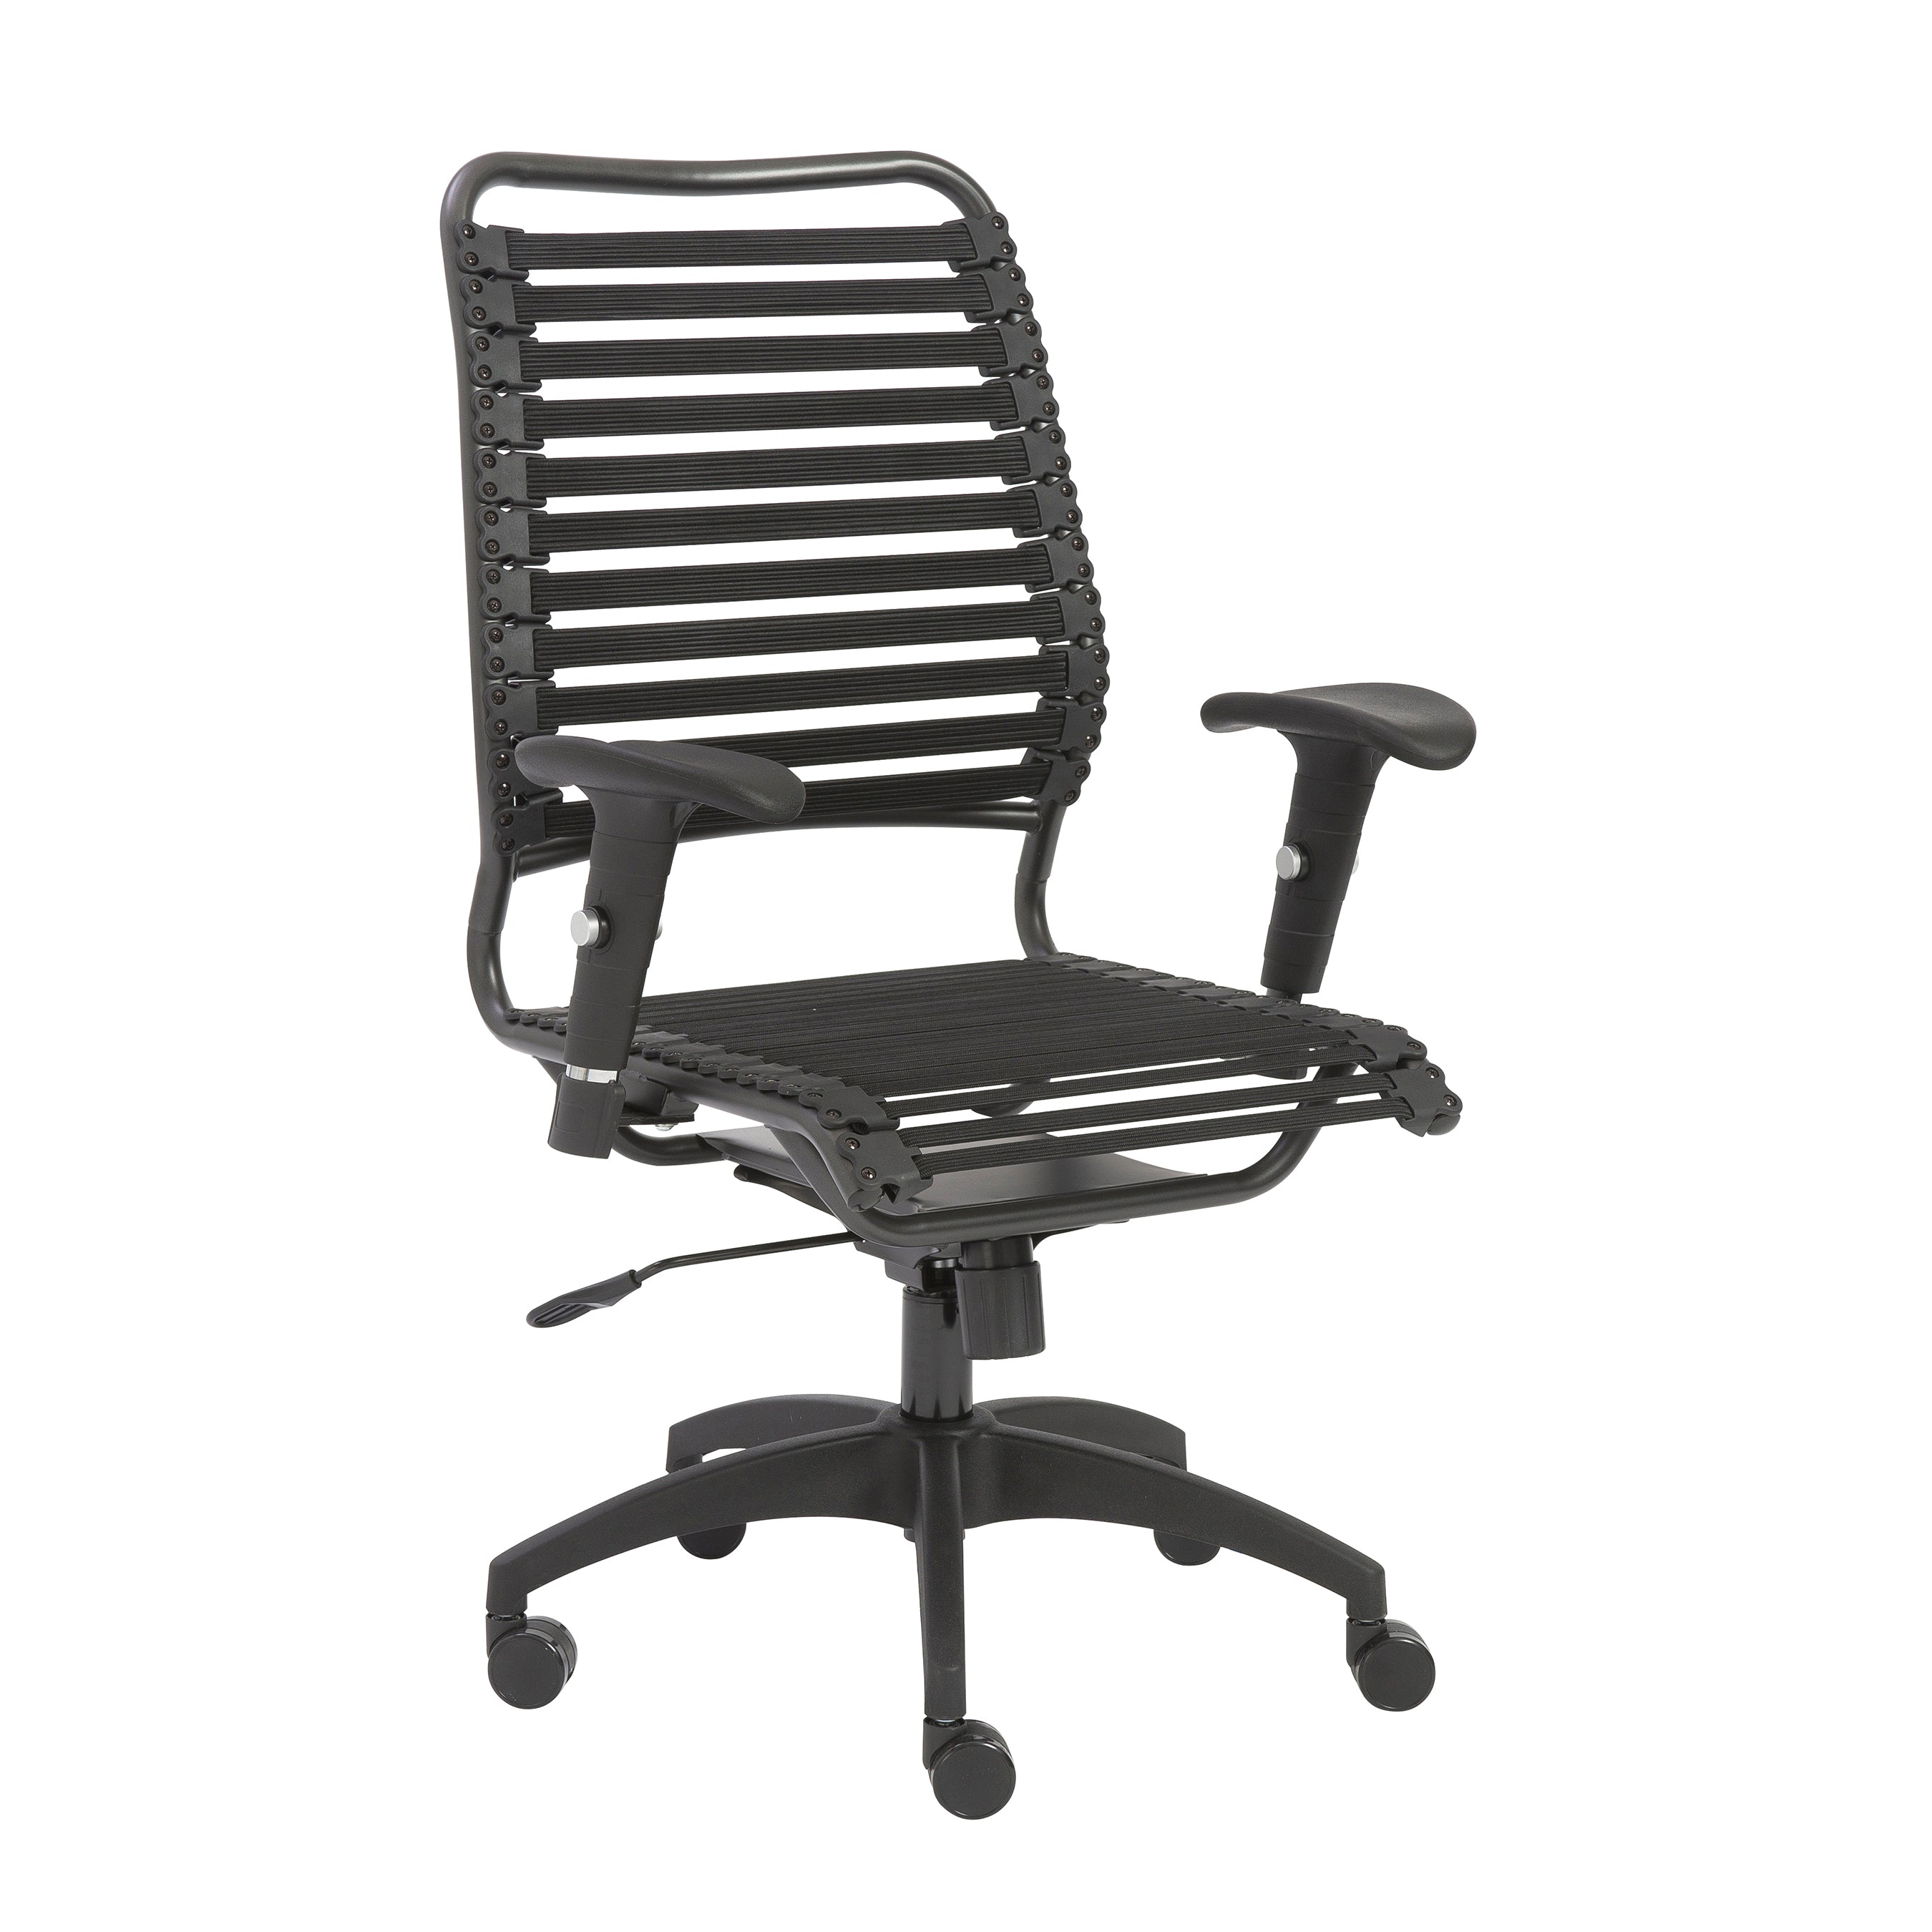 Baba Flat High Back Office Chair - What A Room